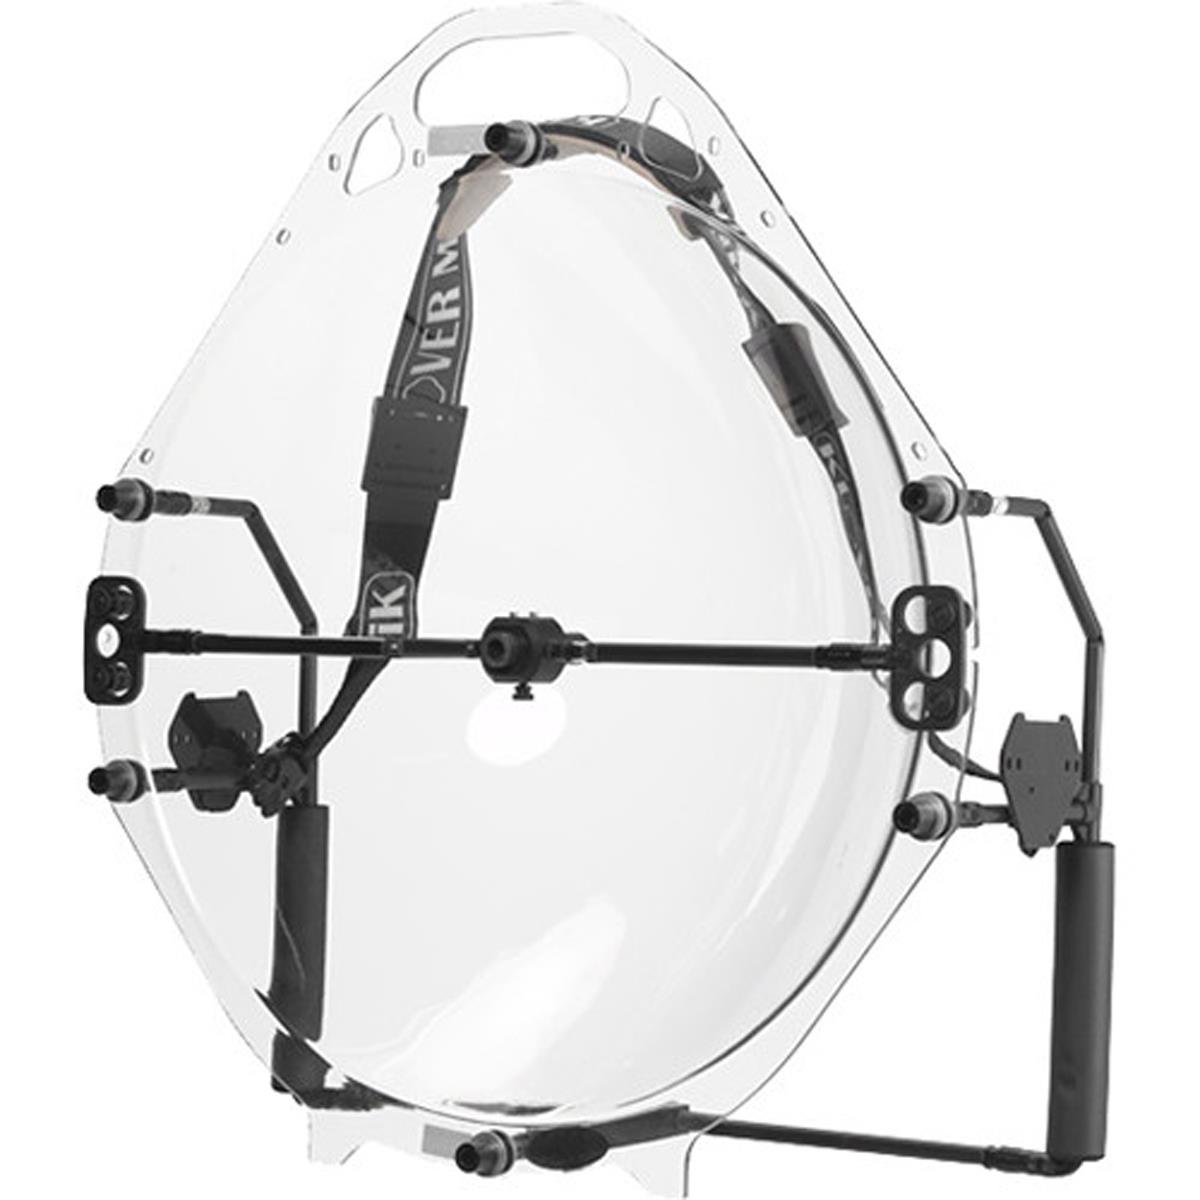 Image of Klover MiK 26 Parabolic Collector